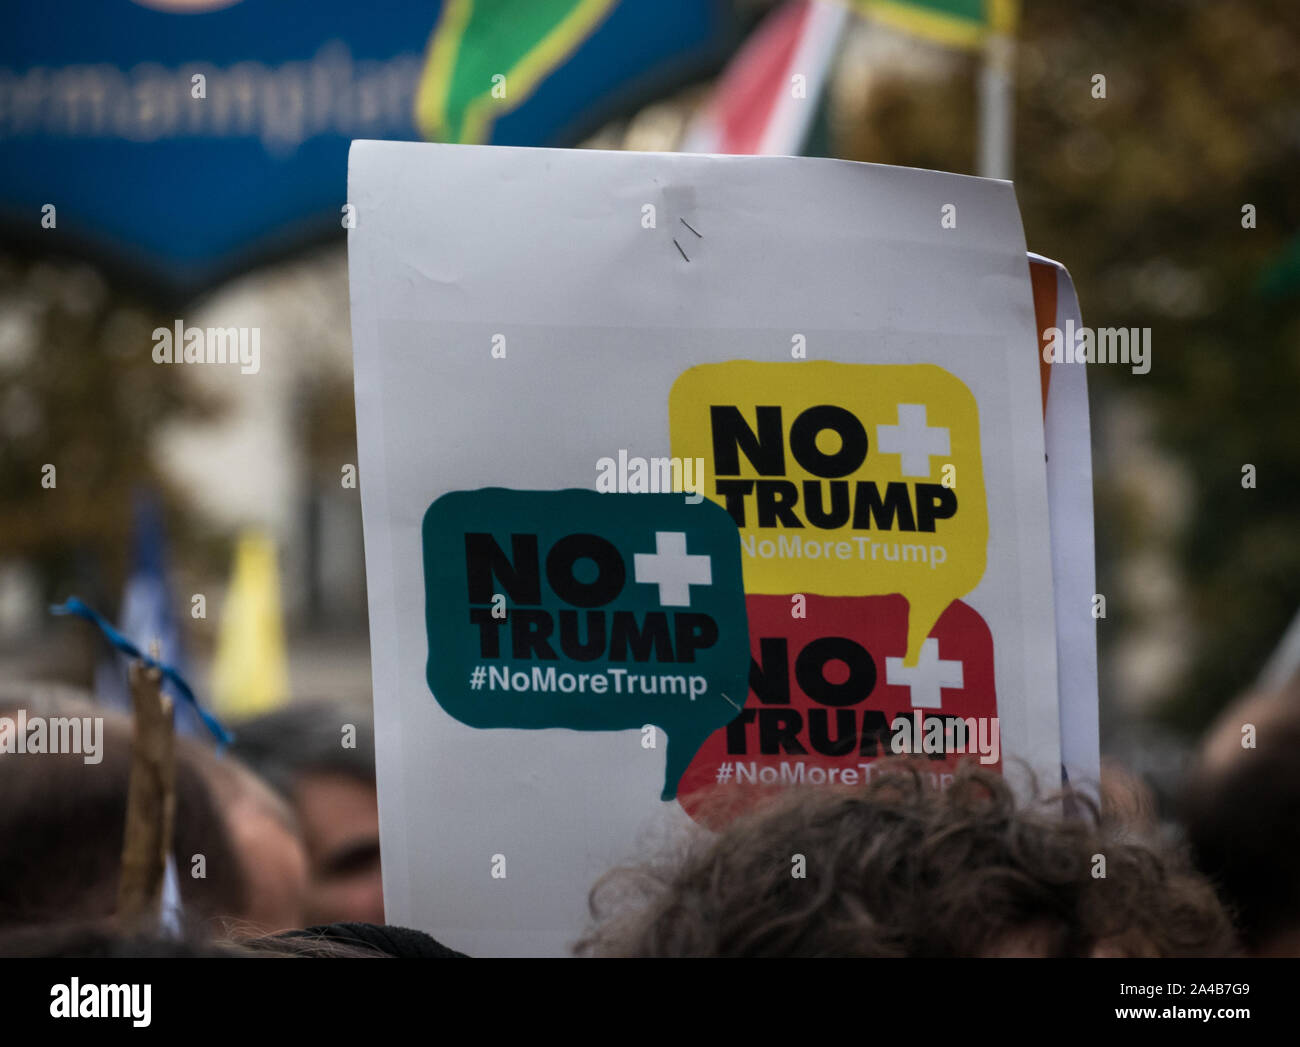 Berlin/Germany: Demostration and protest against Turkish offensive against the Kurds, cardboard with 'No Trump' as sign against US policies Stock Photo